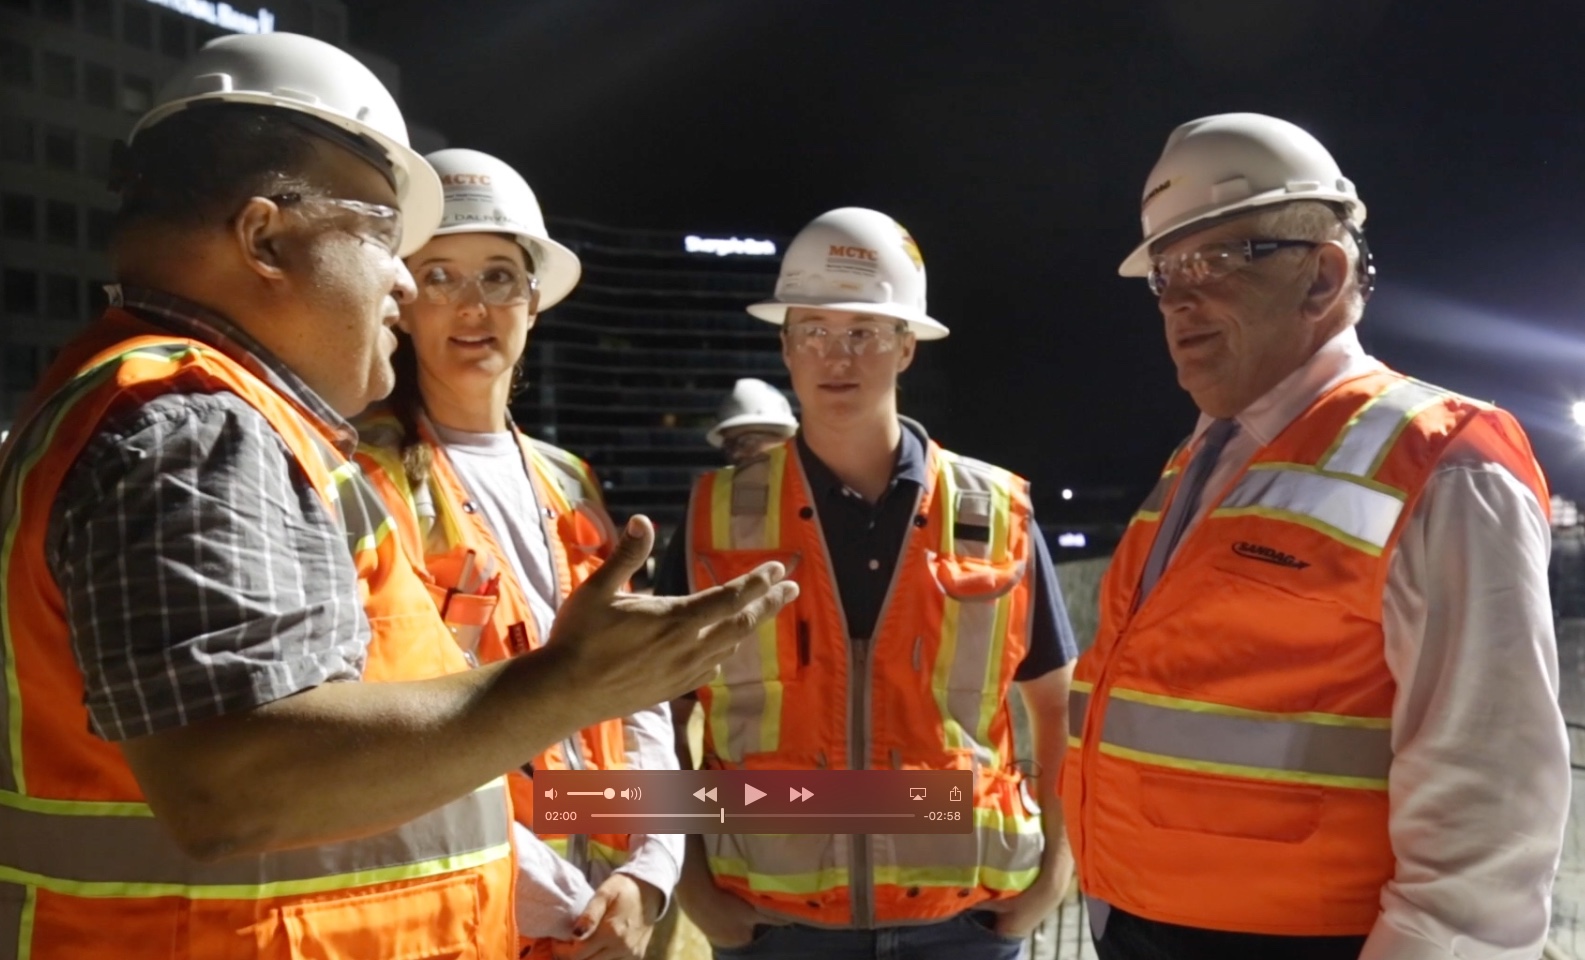 SANDAG Executive Director Hasan Ikhrata, right, speaks with the agency’s construction crew at the site of a concrete pour for the Mid-Coast Trolley Project at Genesee Avenue and La Jolla Village Drive. The pour formed the deck for the elevated Trolley bridge. (Scene from a SANDAG video)